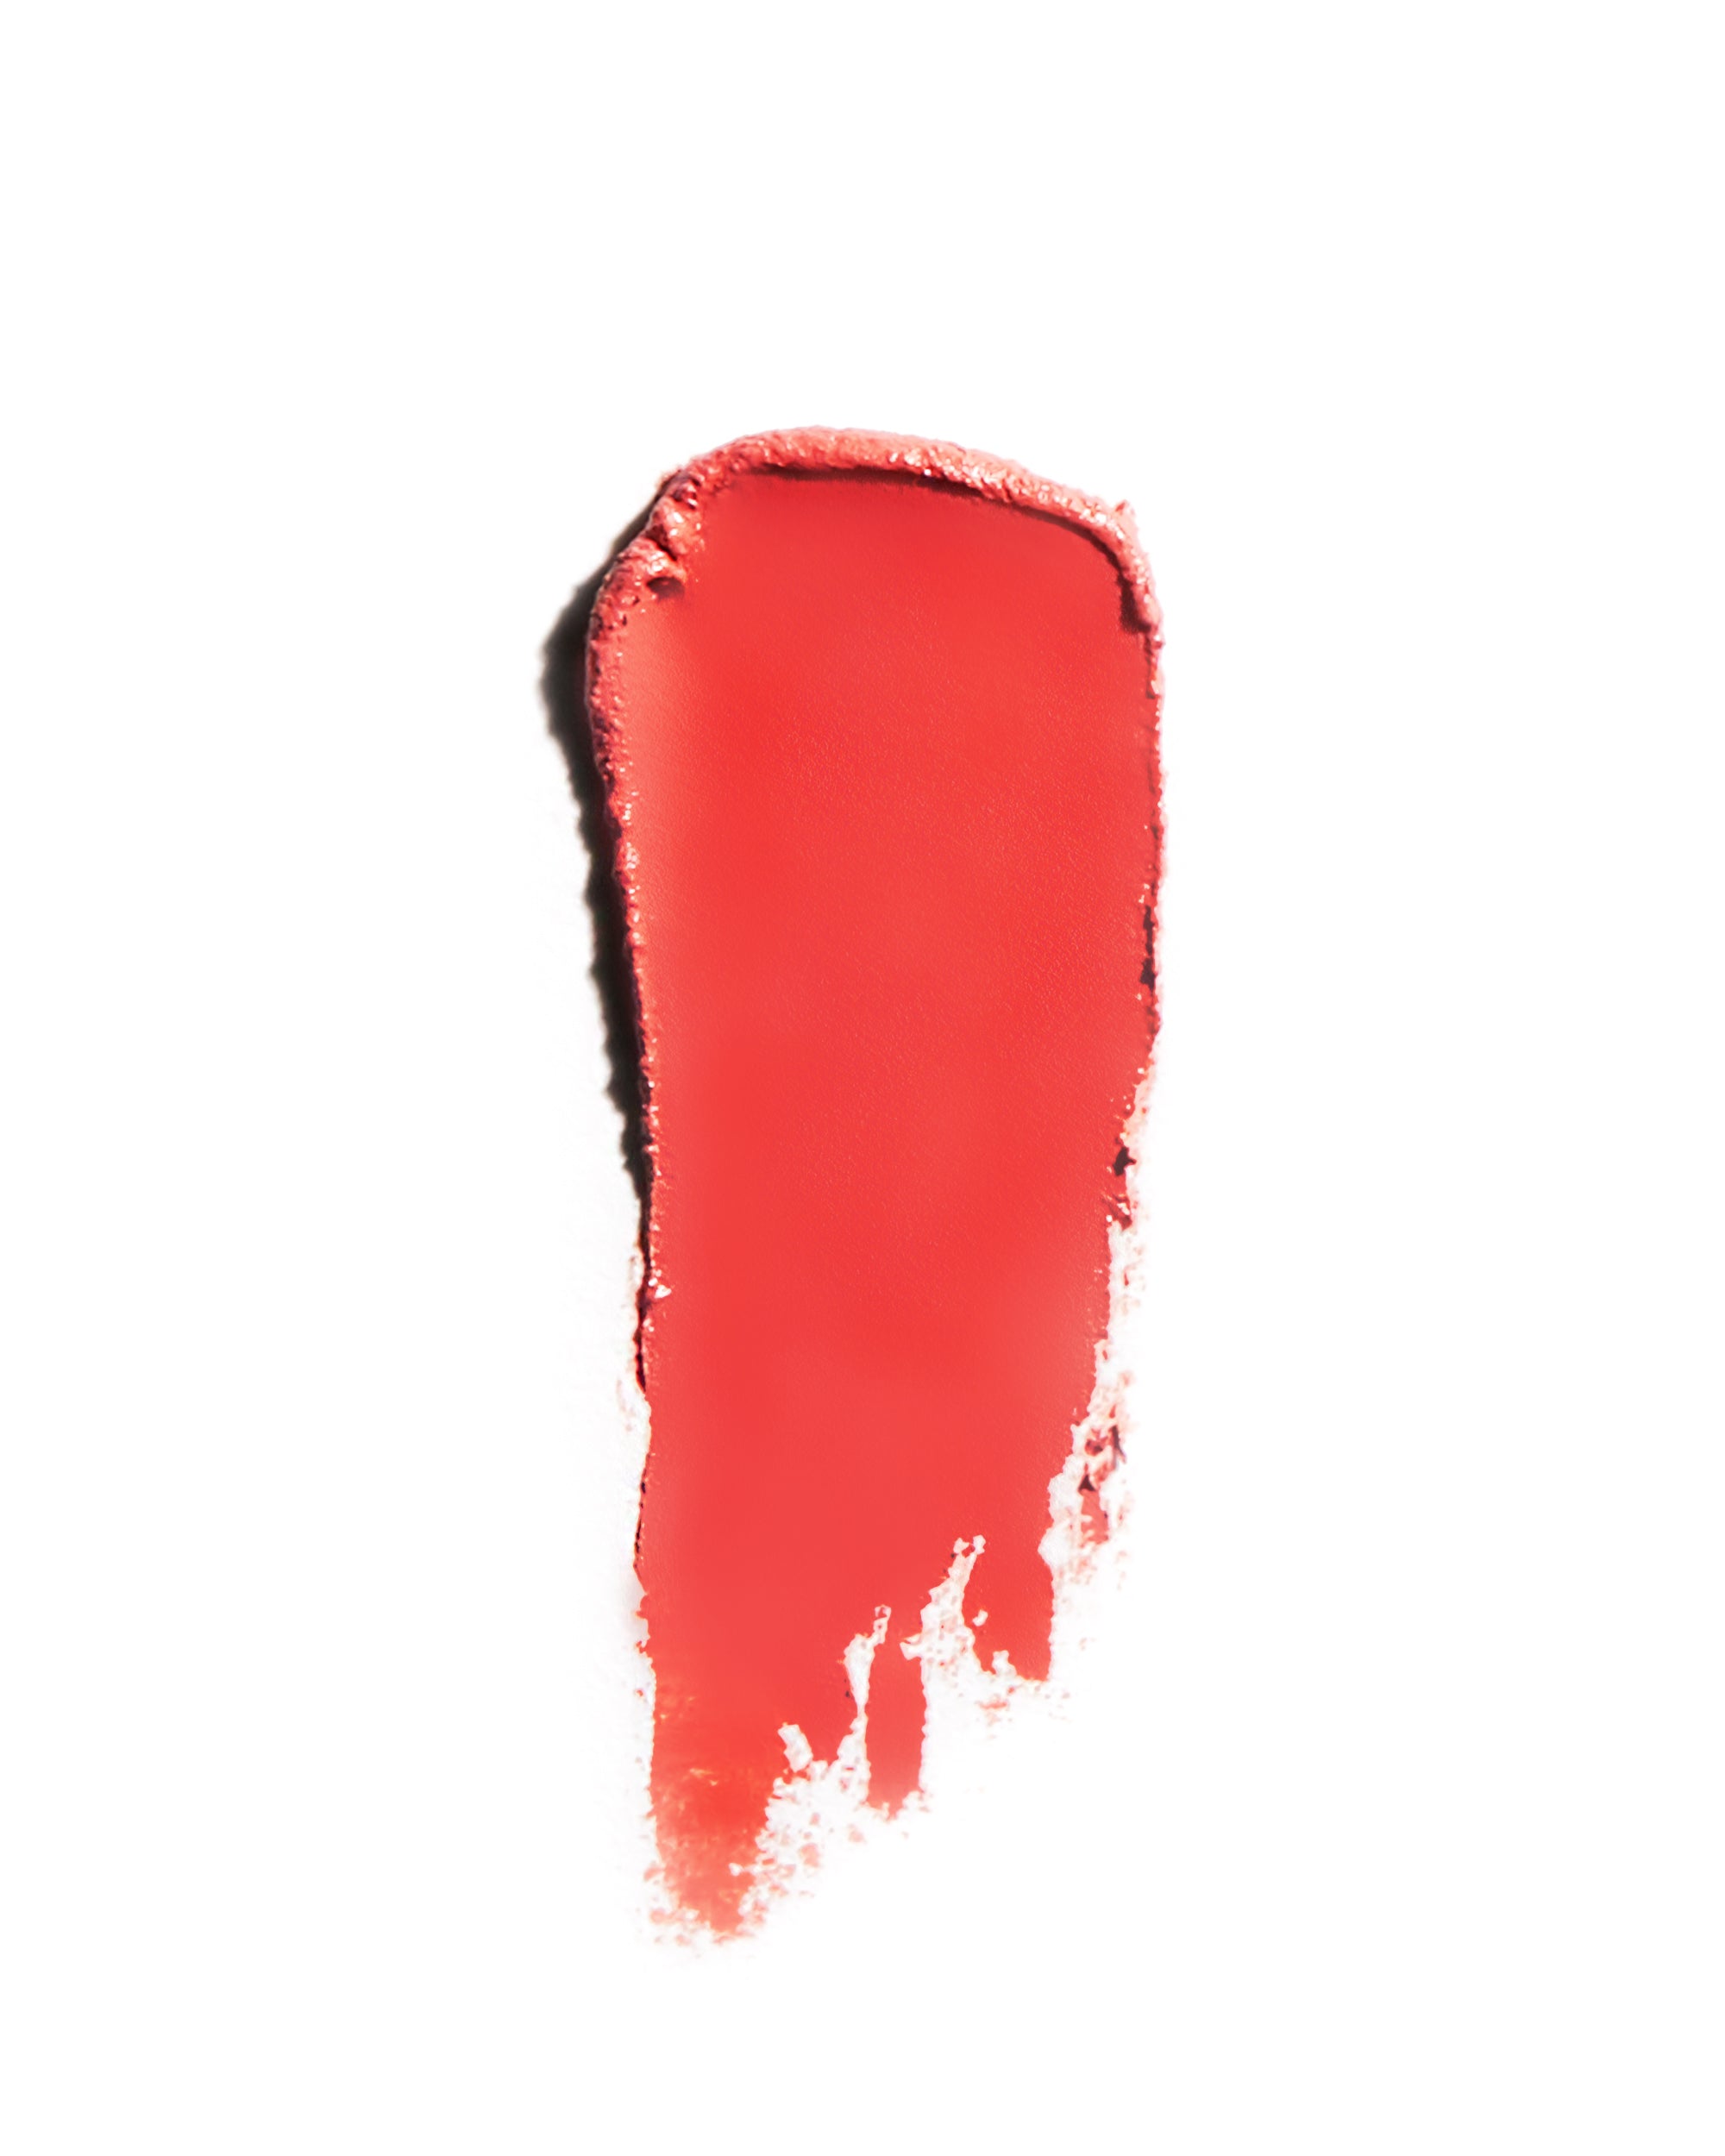 Kjaer Weis Lipstick Amour Rouge Swatch